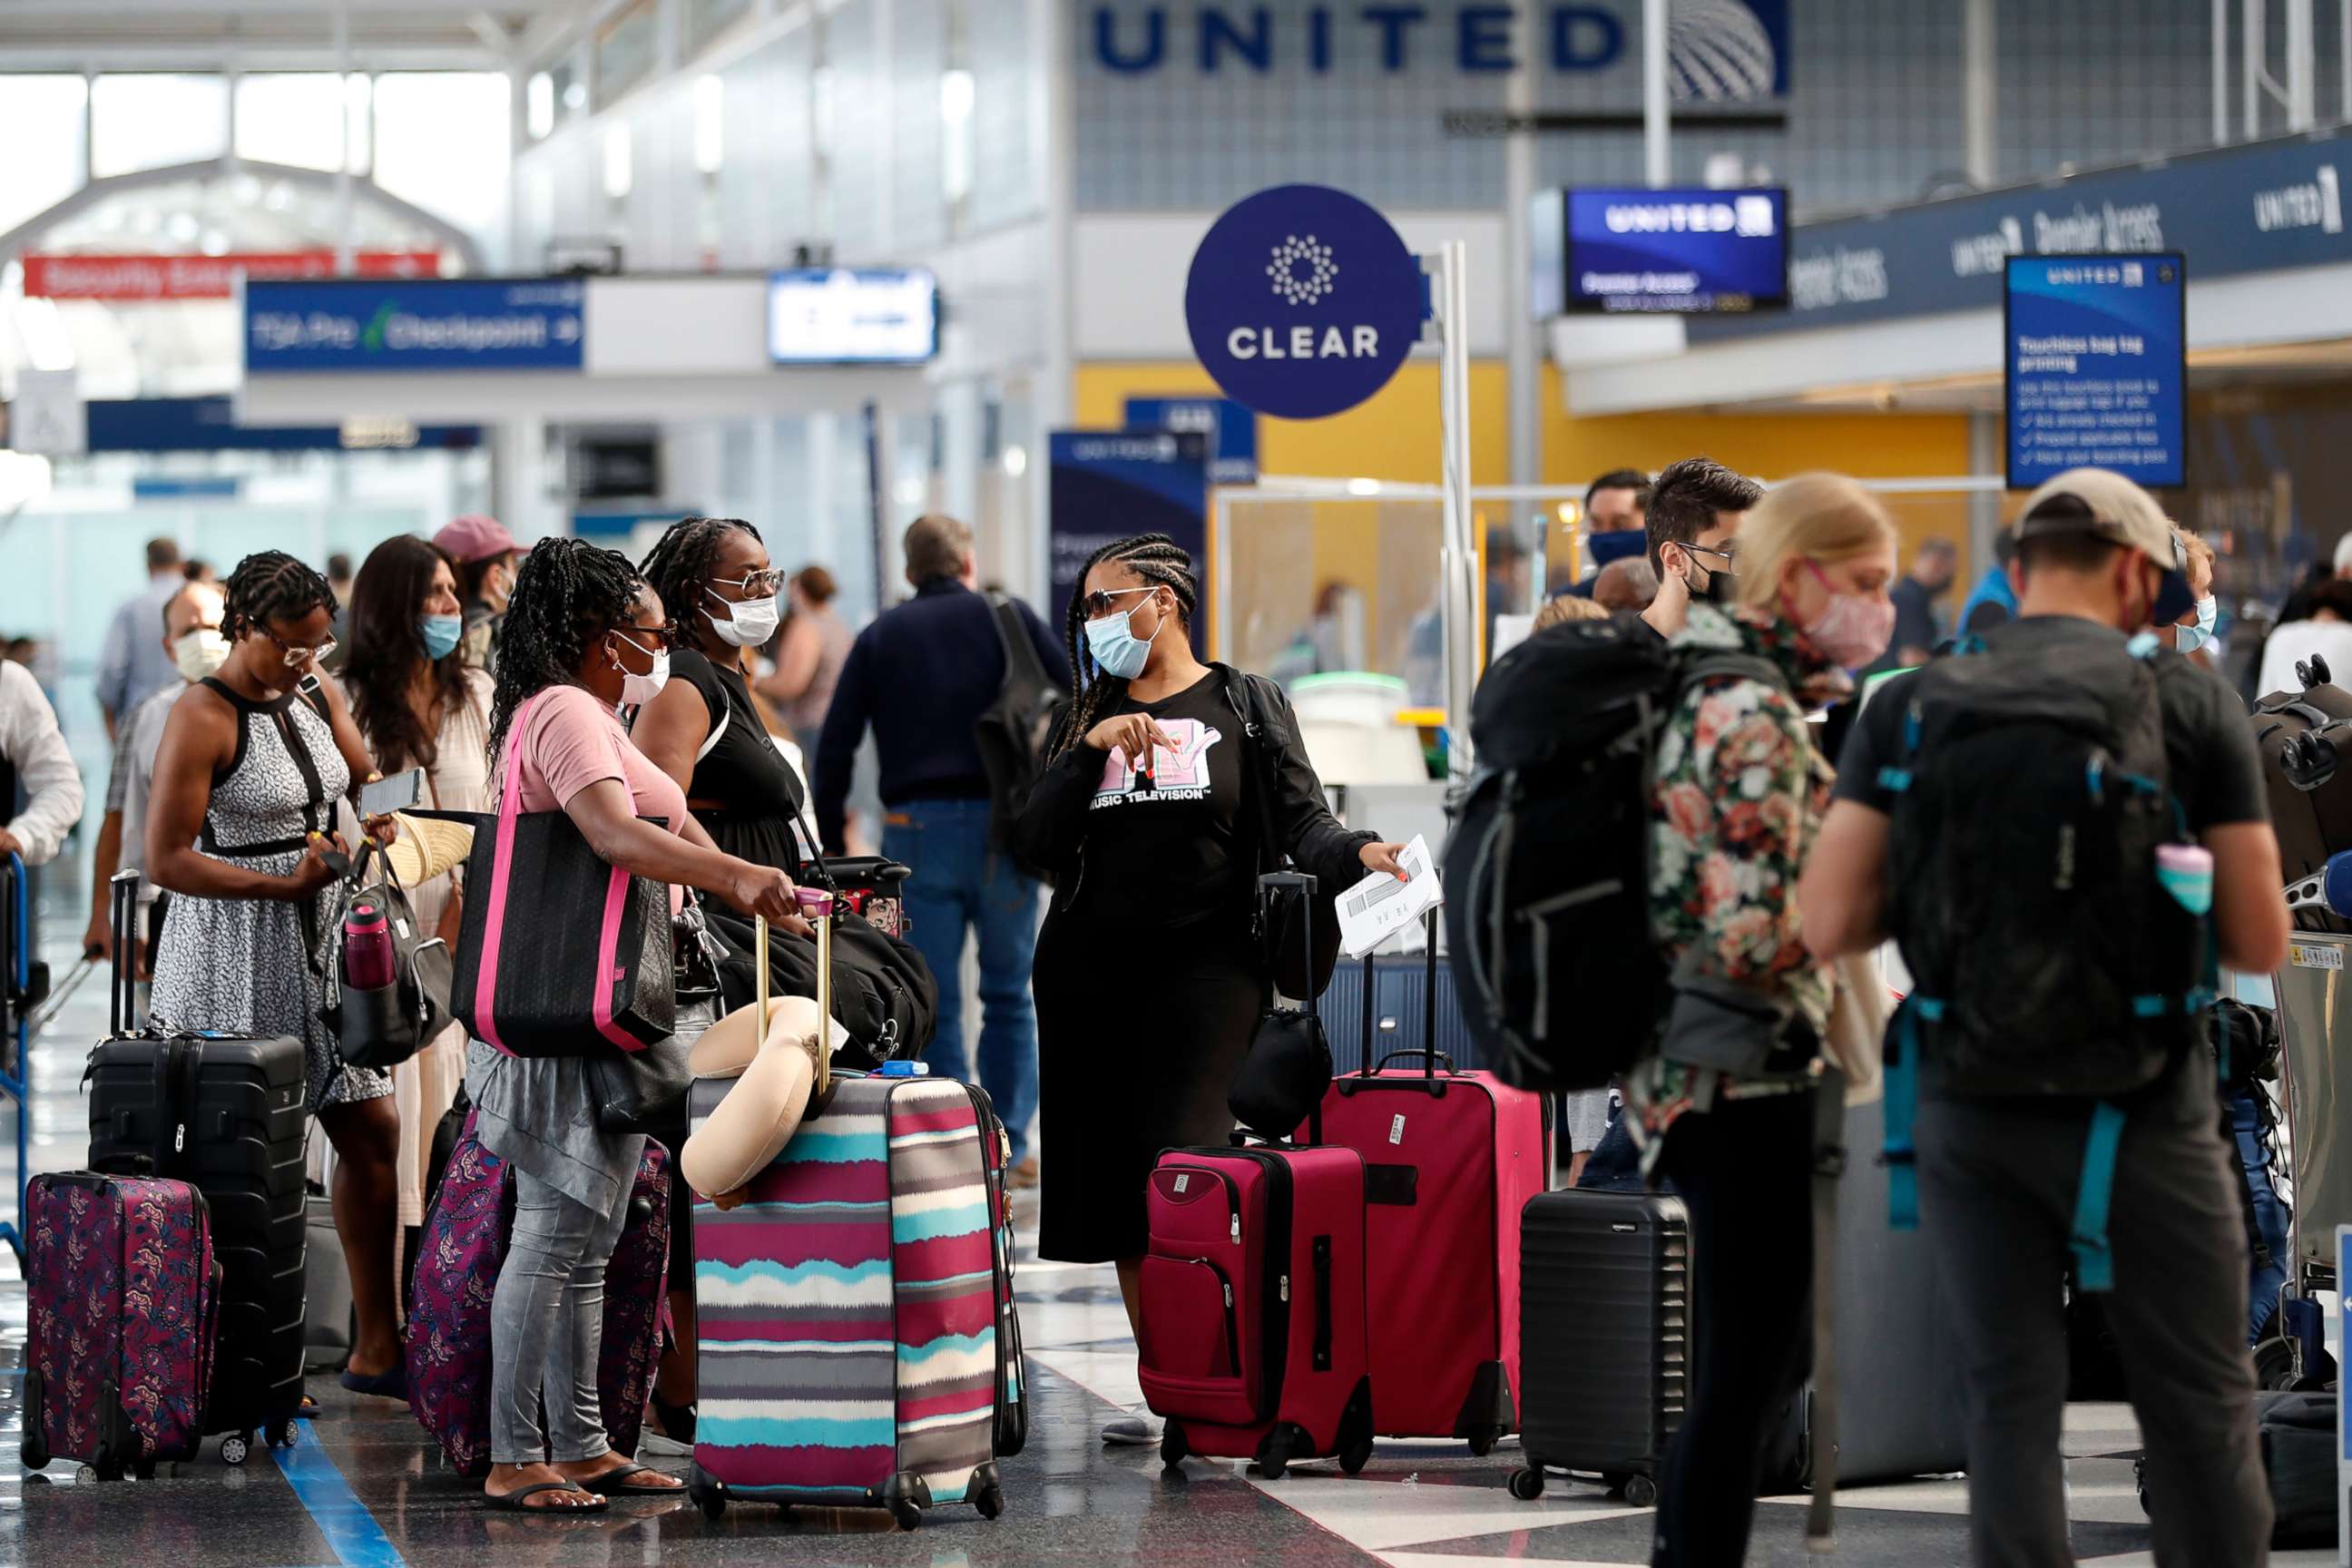 PHOTO: People wait in line at O'Hare International Airport in Chicago, ahead of Fourth of July weekend, July 1, 2021.